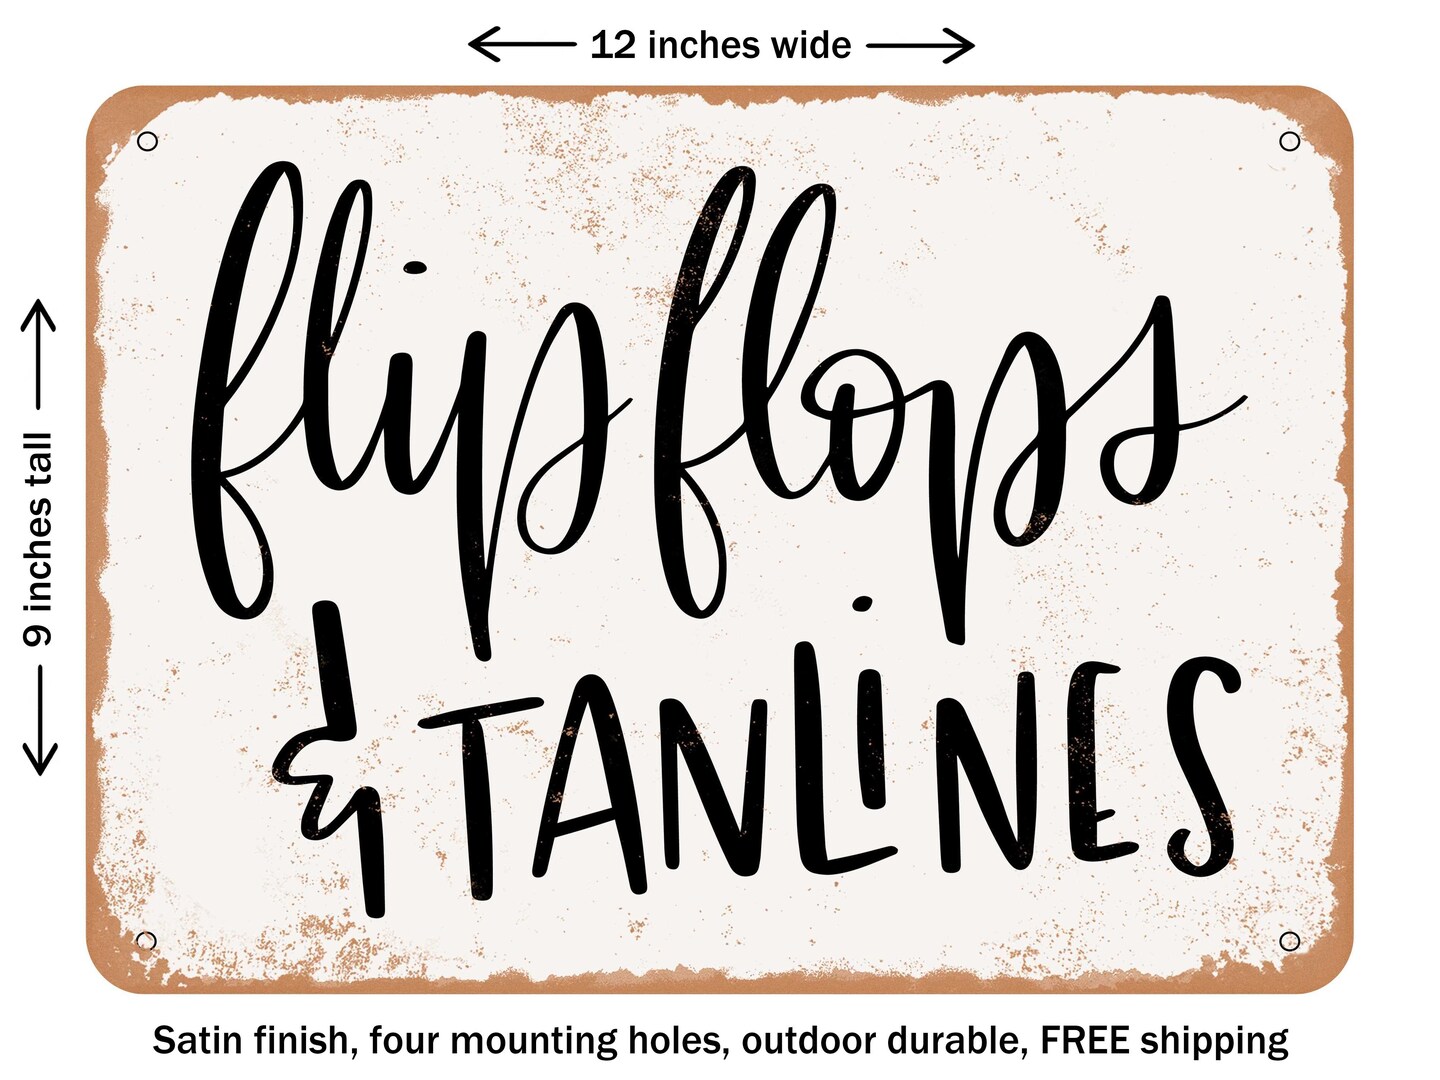 Decorative Metal Sign Flipflops And Tanlines Vintage Rusty Look